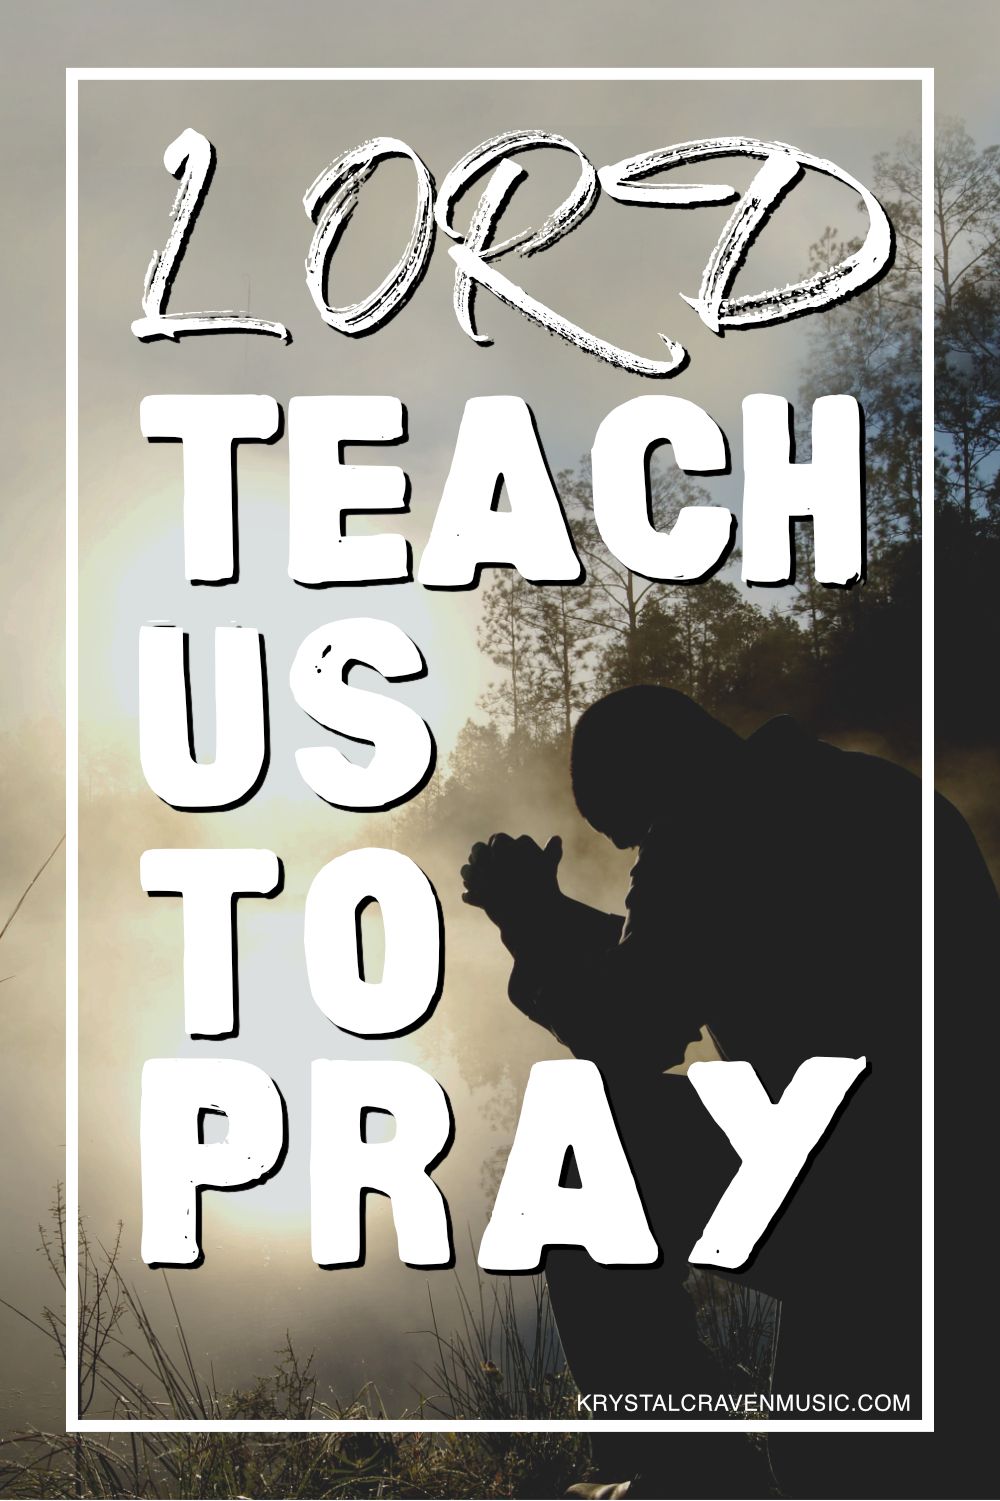 The title text "Lord Teach Us to Pray" overlaying a photo of a man knealing on one knee and praying with his head bowed.